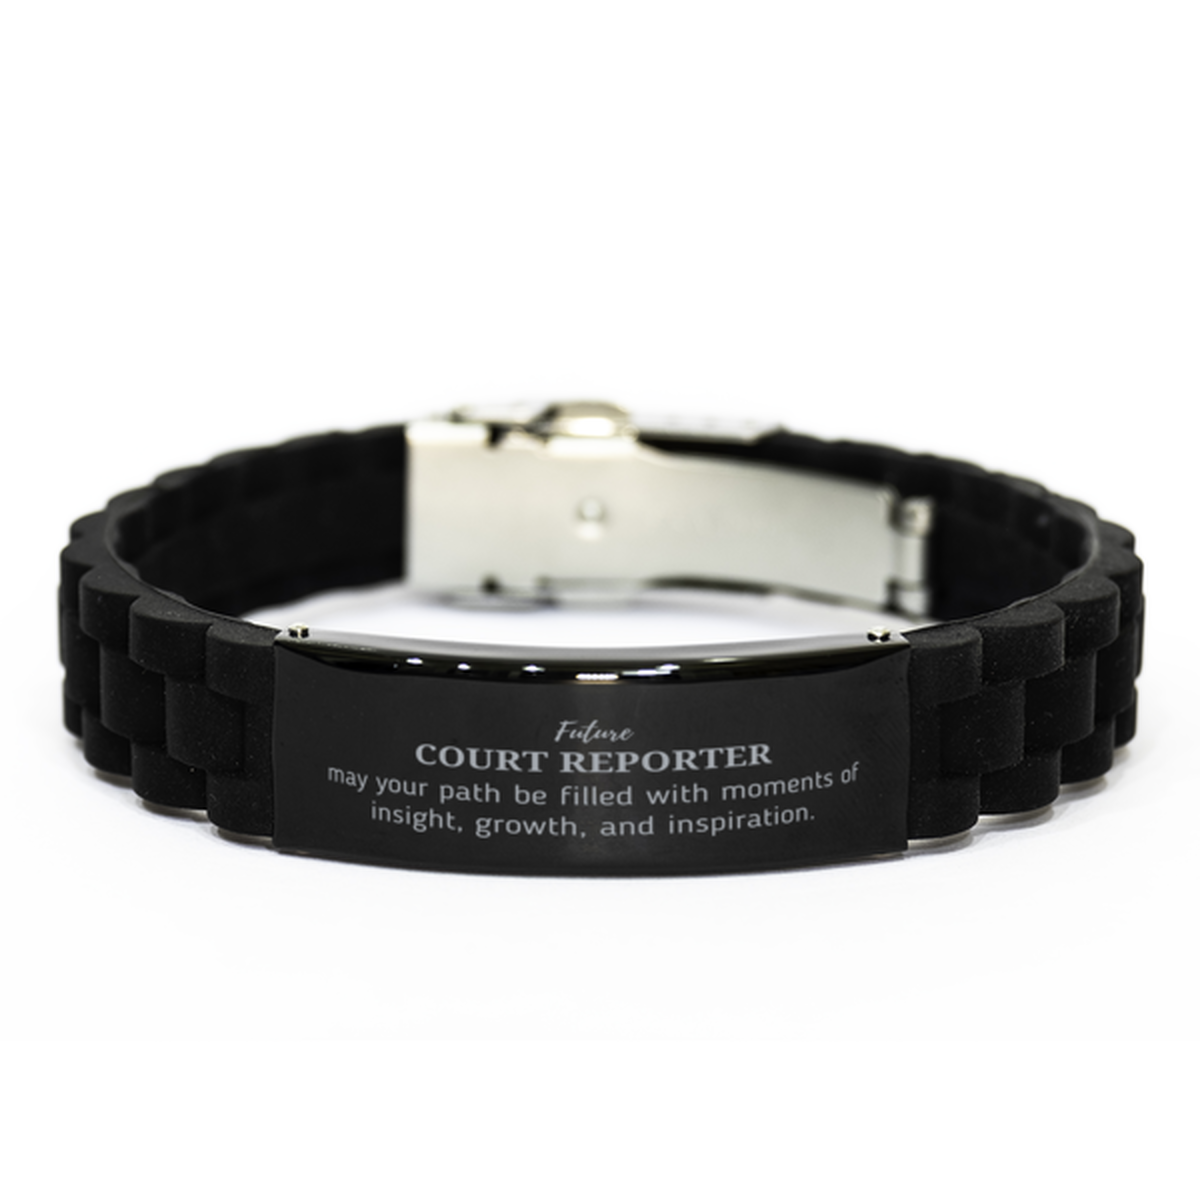 Future Court Reporter Gifts, May your path be filled with moments of insight, Graduation Gifts for New Court Reporter, Christmas Unique Black Glidelock Clasp Bracelet For Men, Women, Friends